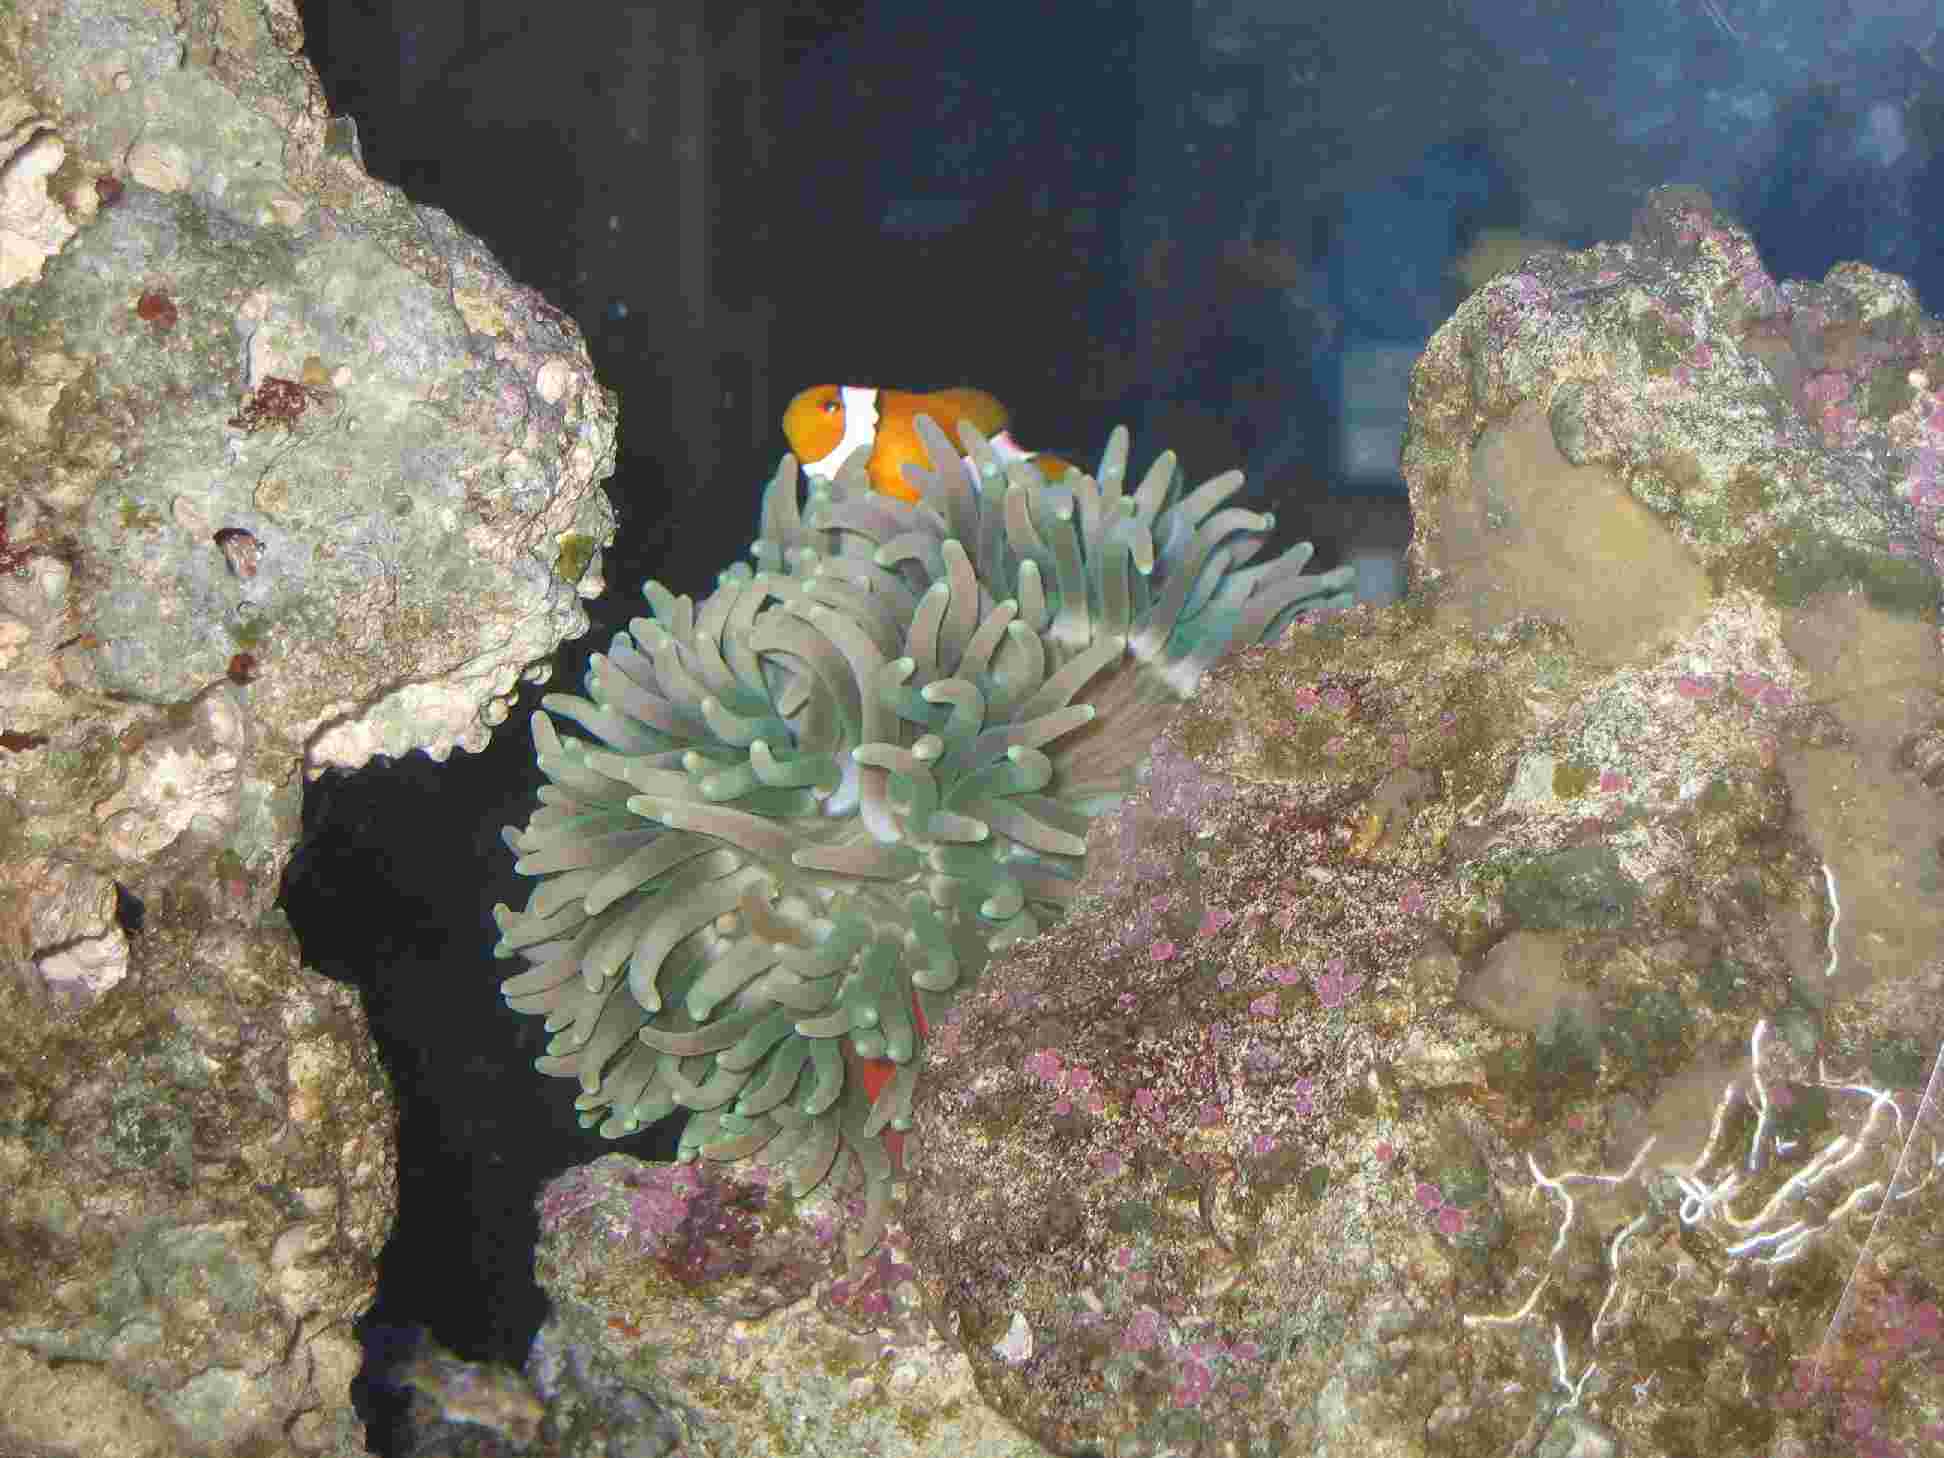 New Anenome with Nemo -- not sure what species of Anenome this is.